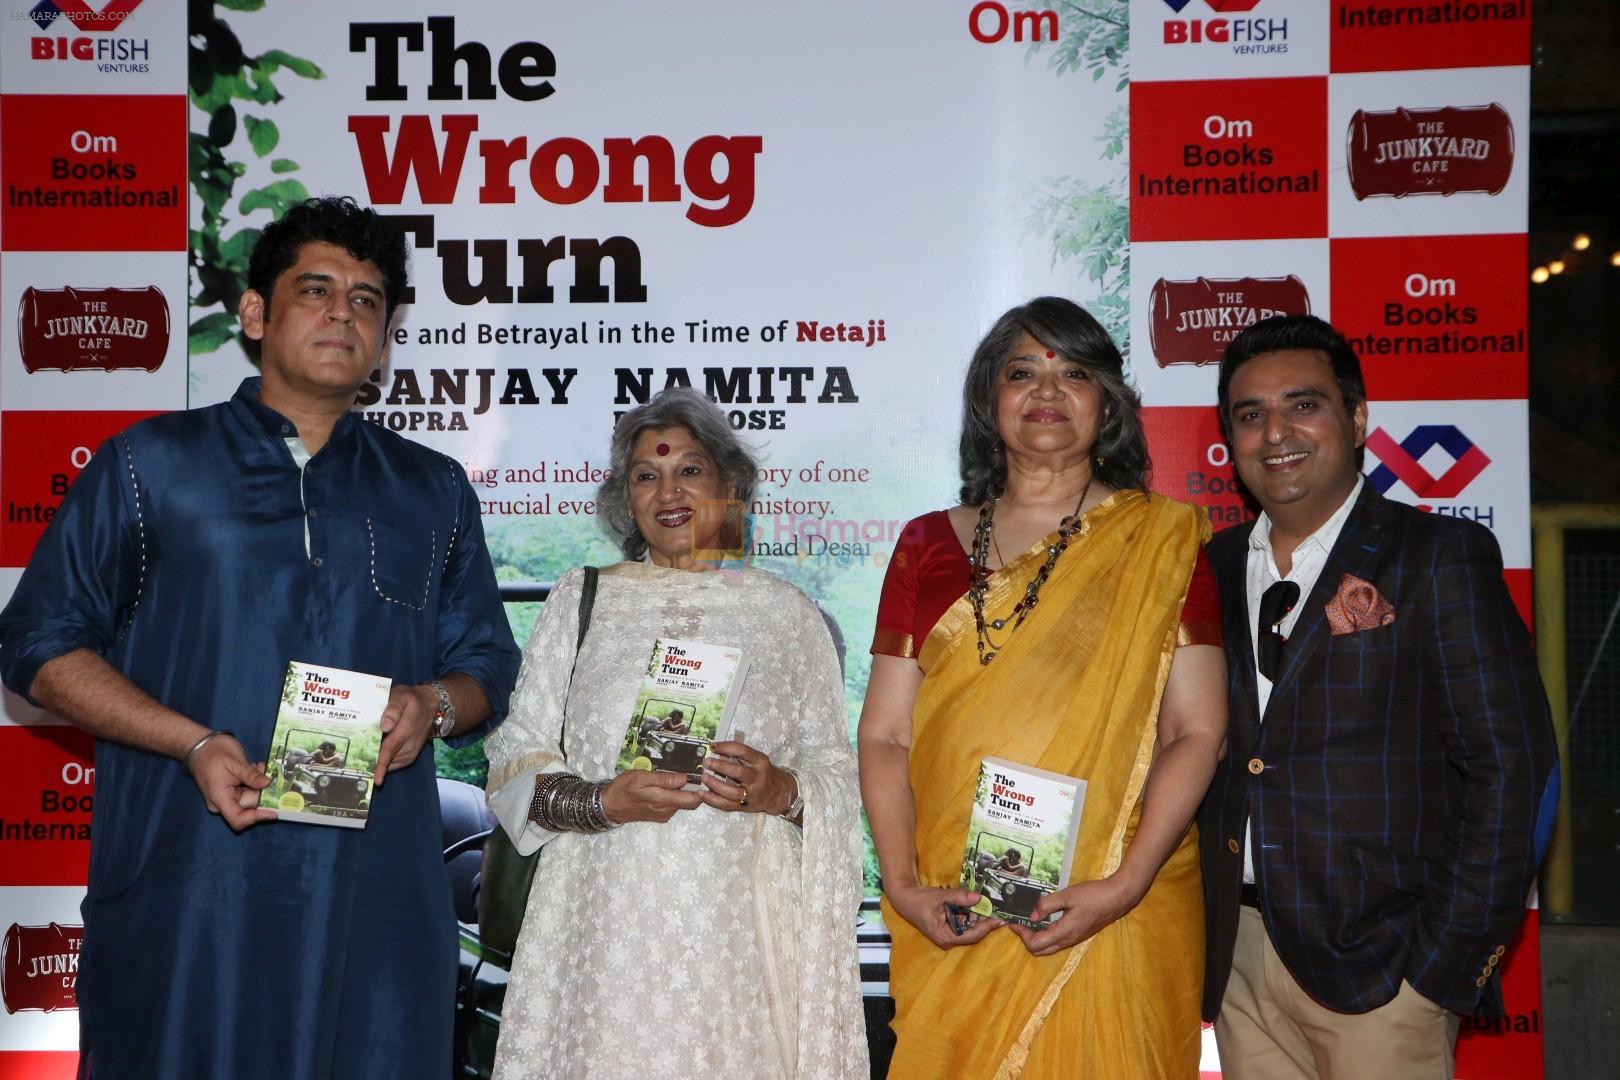 Dolly Thakore at the Book launch of The Wrong Turn by Sanjay Chopra and Namita Roy Ghose on 1st March 2017